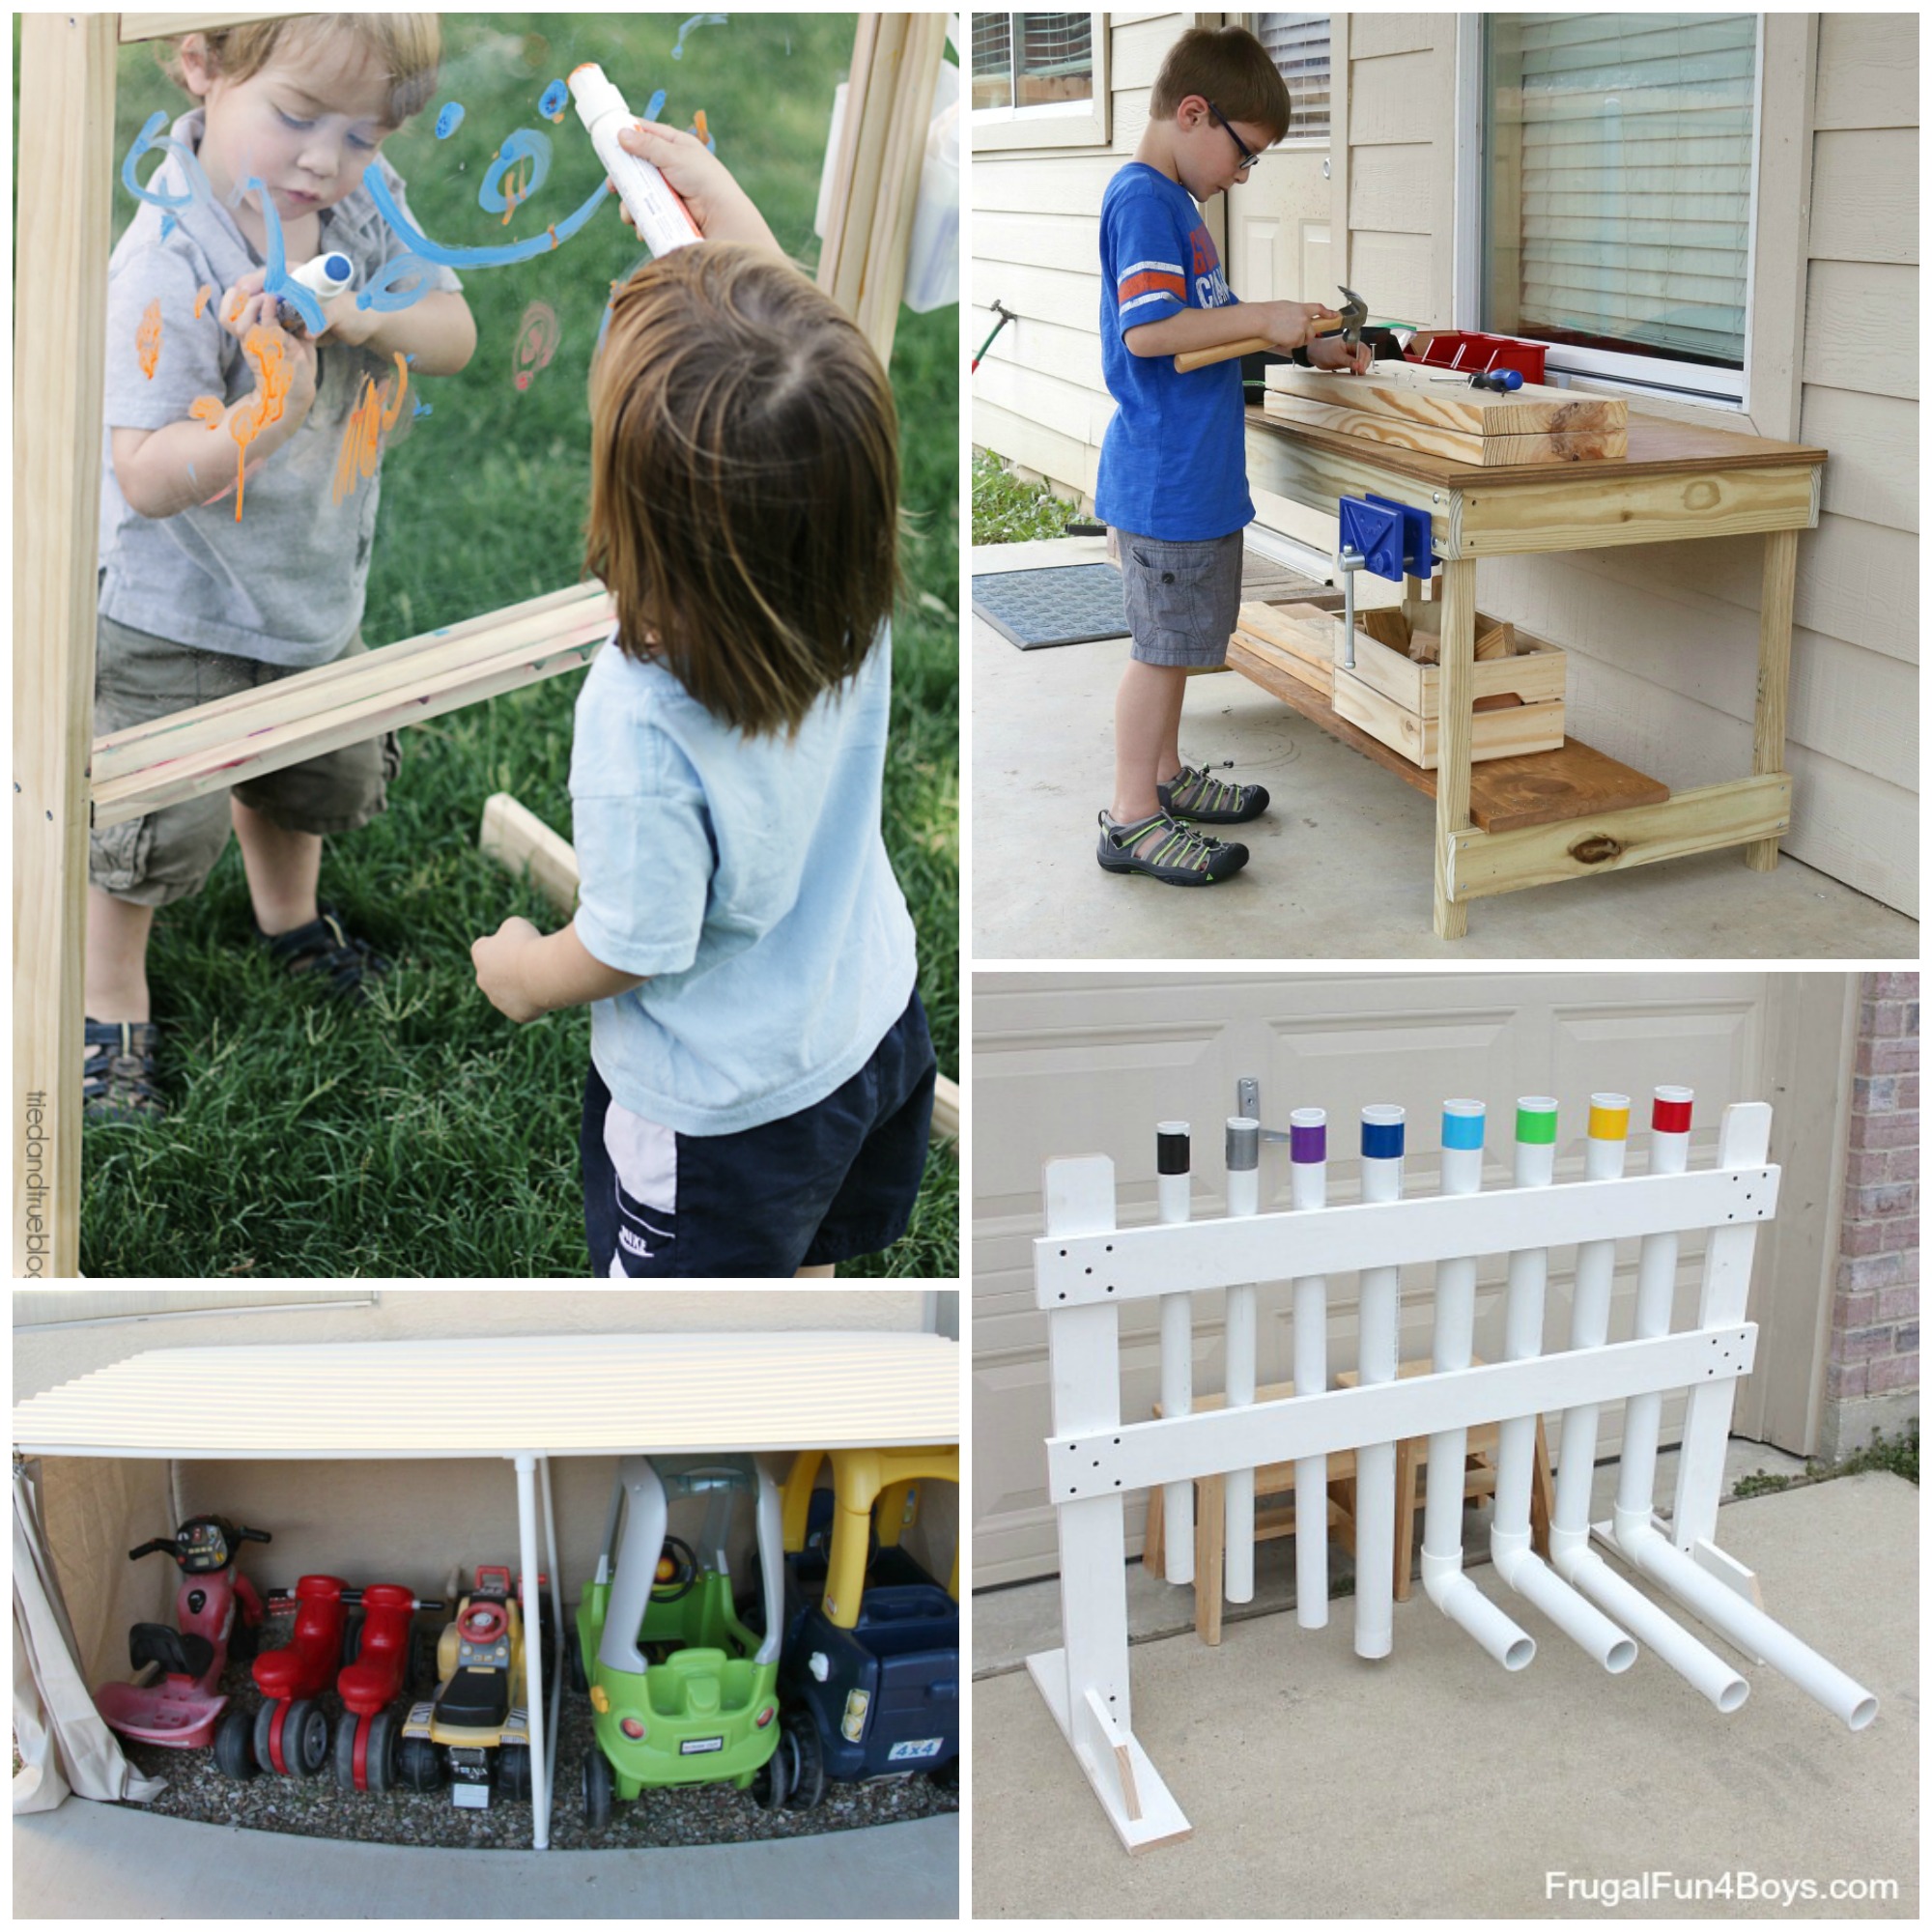 25 Awesome Backyard Play Spaces!  Build climbing structures, toys, sand boxes, and more!